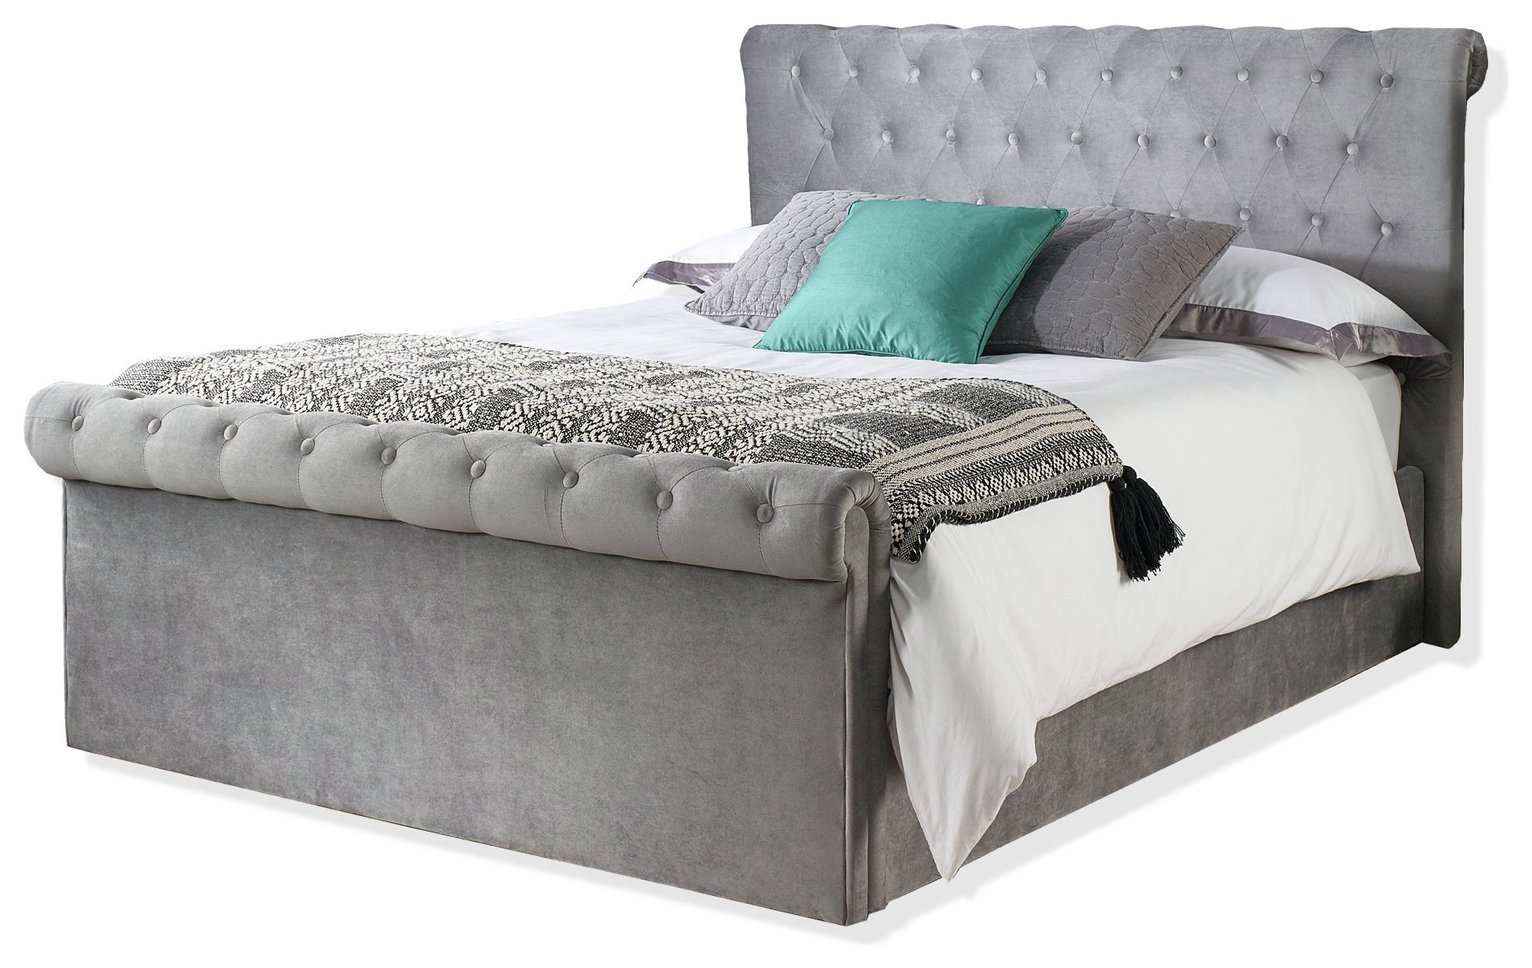 Aspire Chesterfield Double Ottoman Bed Frame - Grey